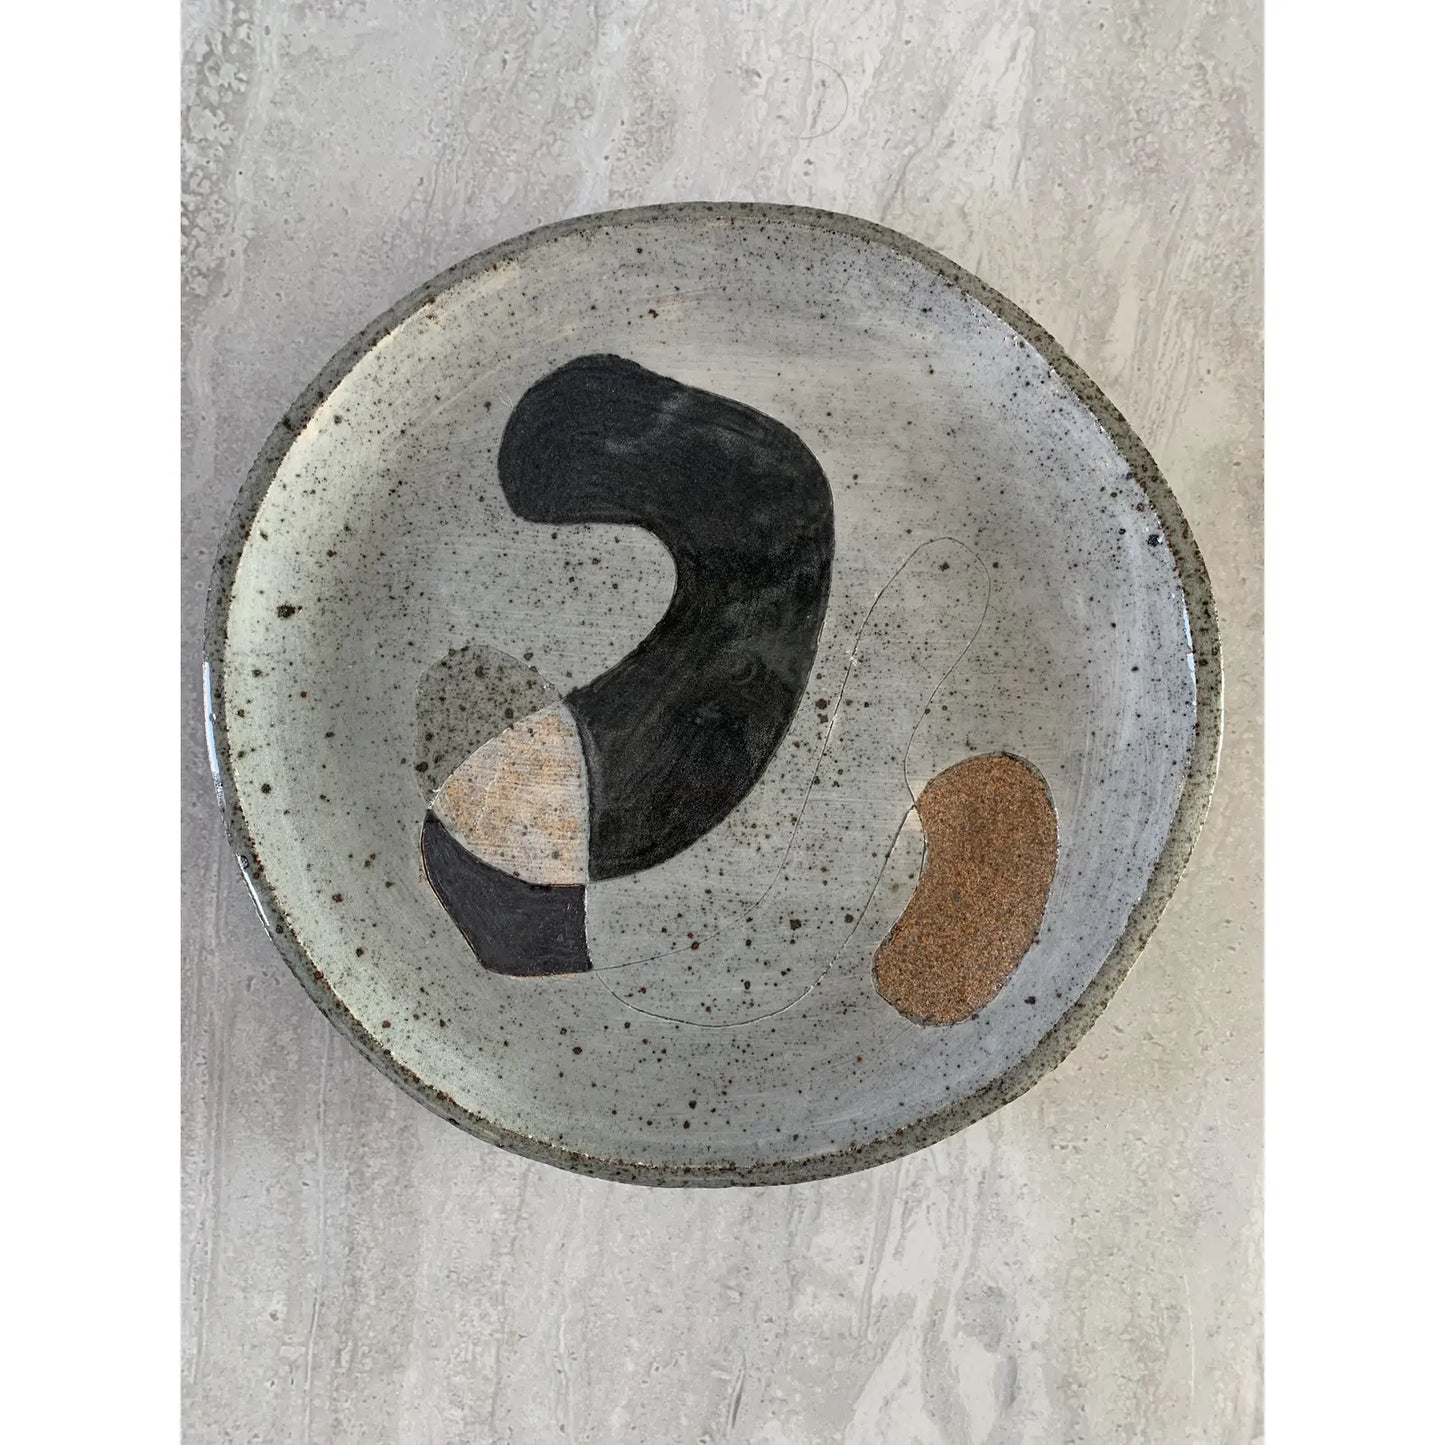 Studio Ceramic Platter With Abstract Decoration